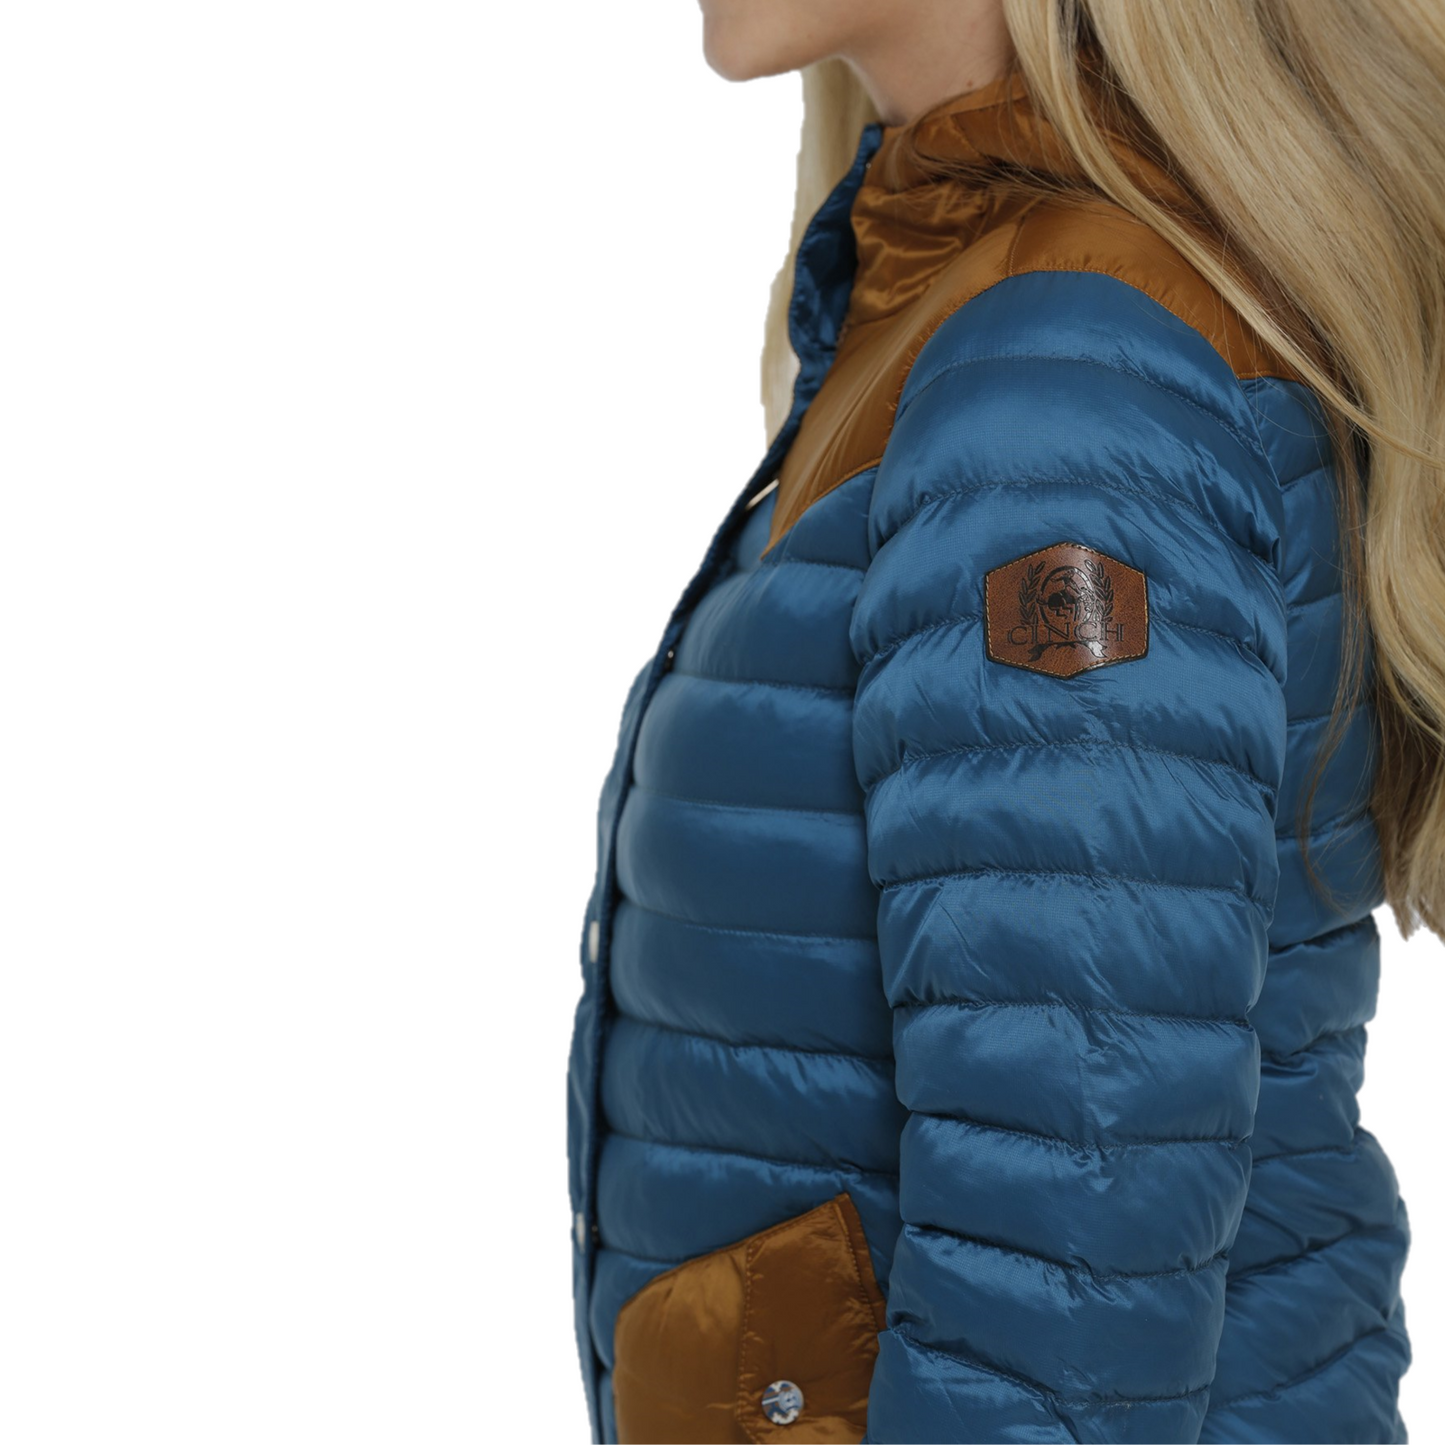 CINCH Jeans  Women's Quilted Jacket - Teal